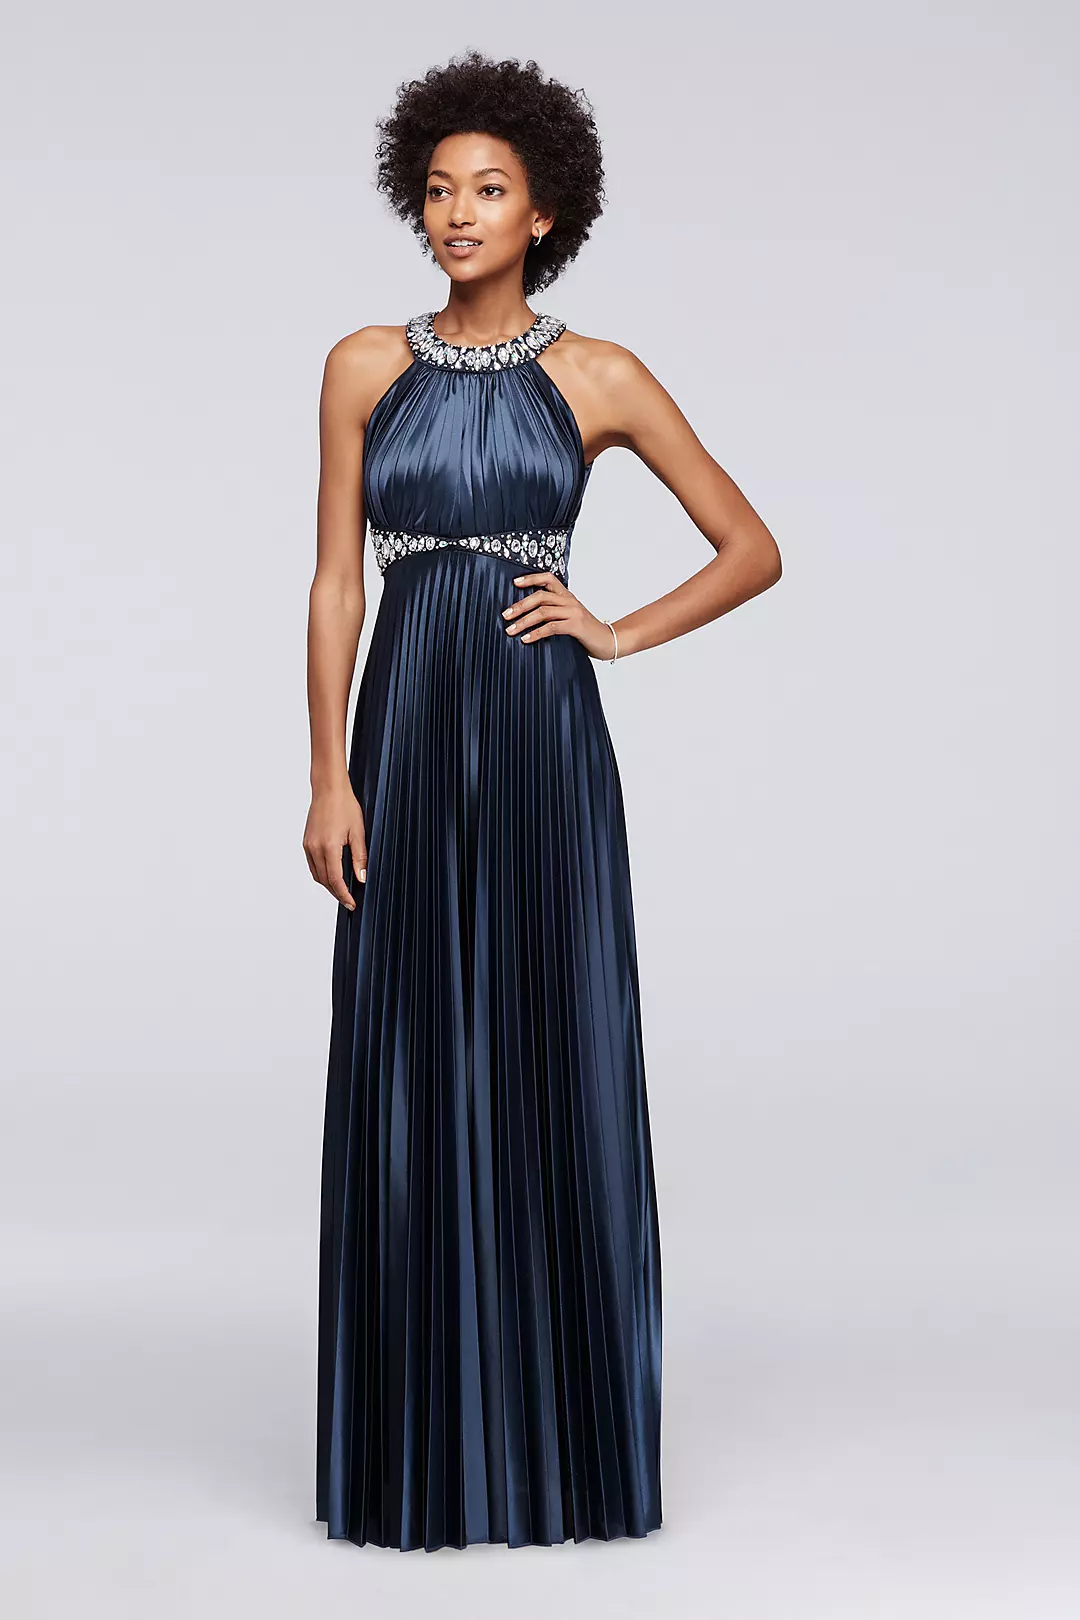 Beaded Strappy Back Halter Prom Dress with Pleats Image